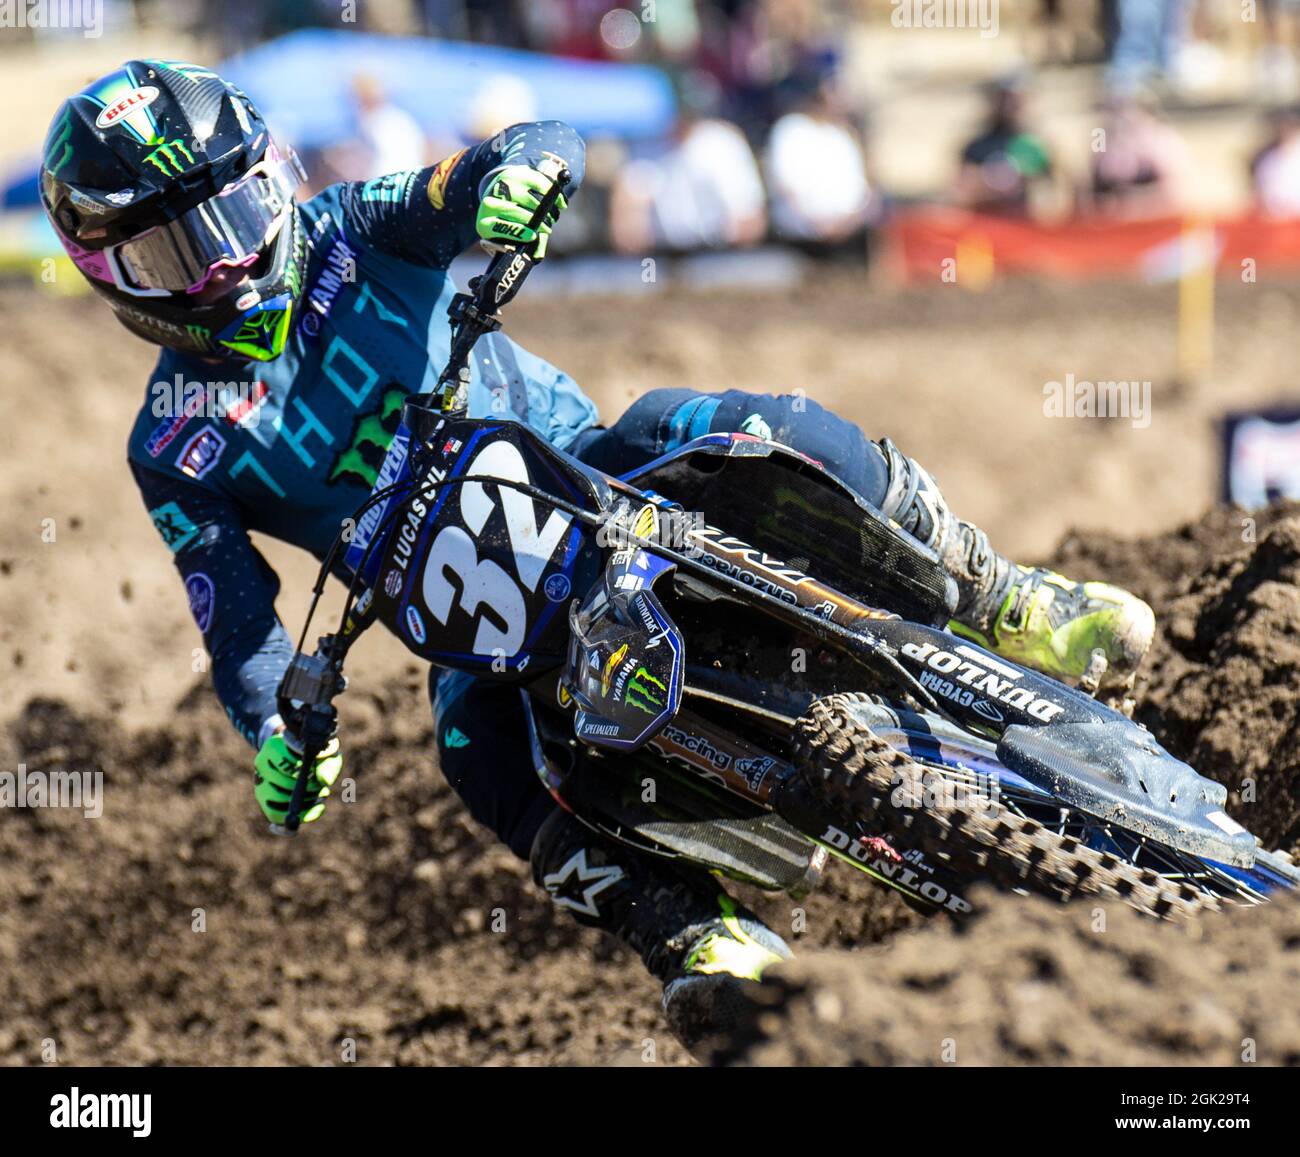 September 11 2021 Rancho Cordova, CA USA Yamaha factory rider Justin Cooper coming out of turn16 during the Lucas Oil Pro Motocross Hangtown Classic 250 Class moto # 1 at Hangtown Rancho Cordova, CA Thurman James/CSM Stock Photo